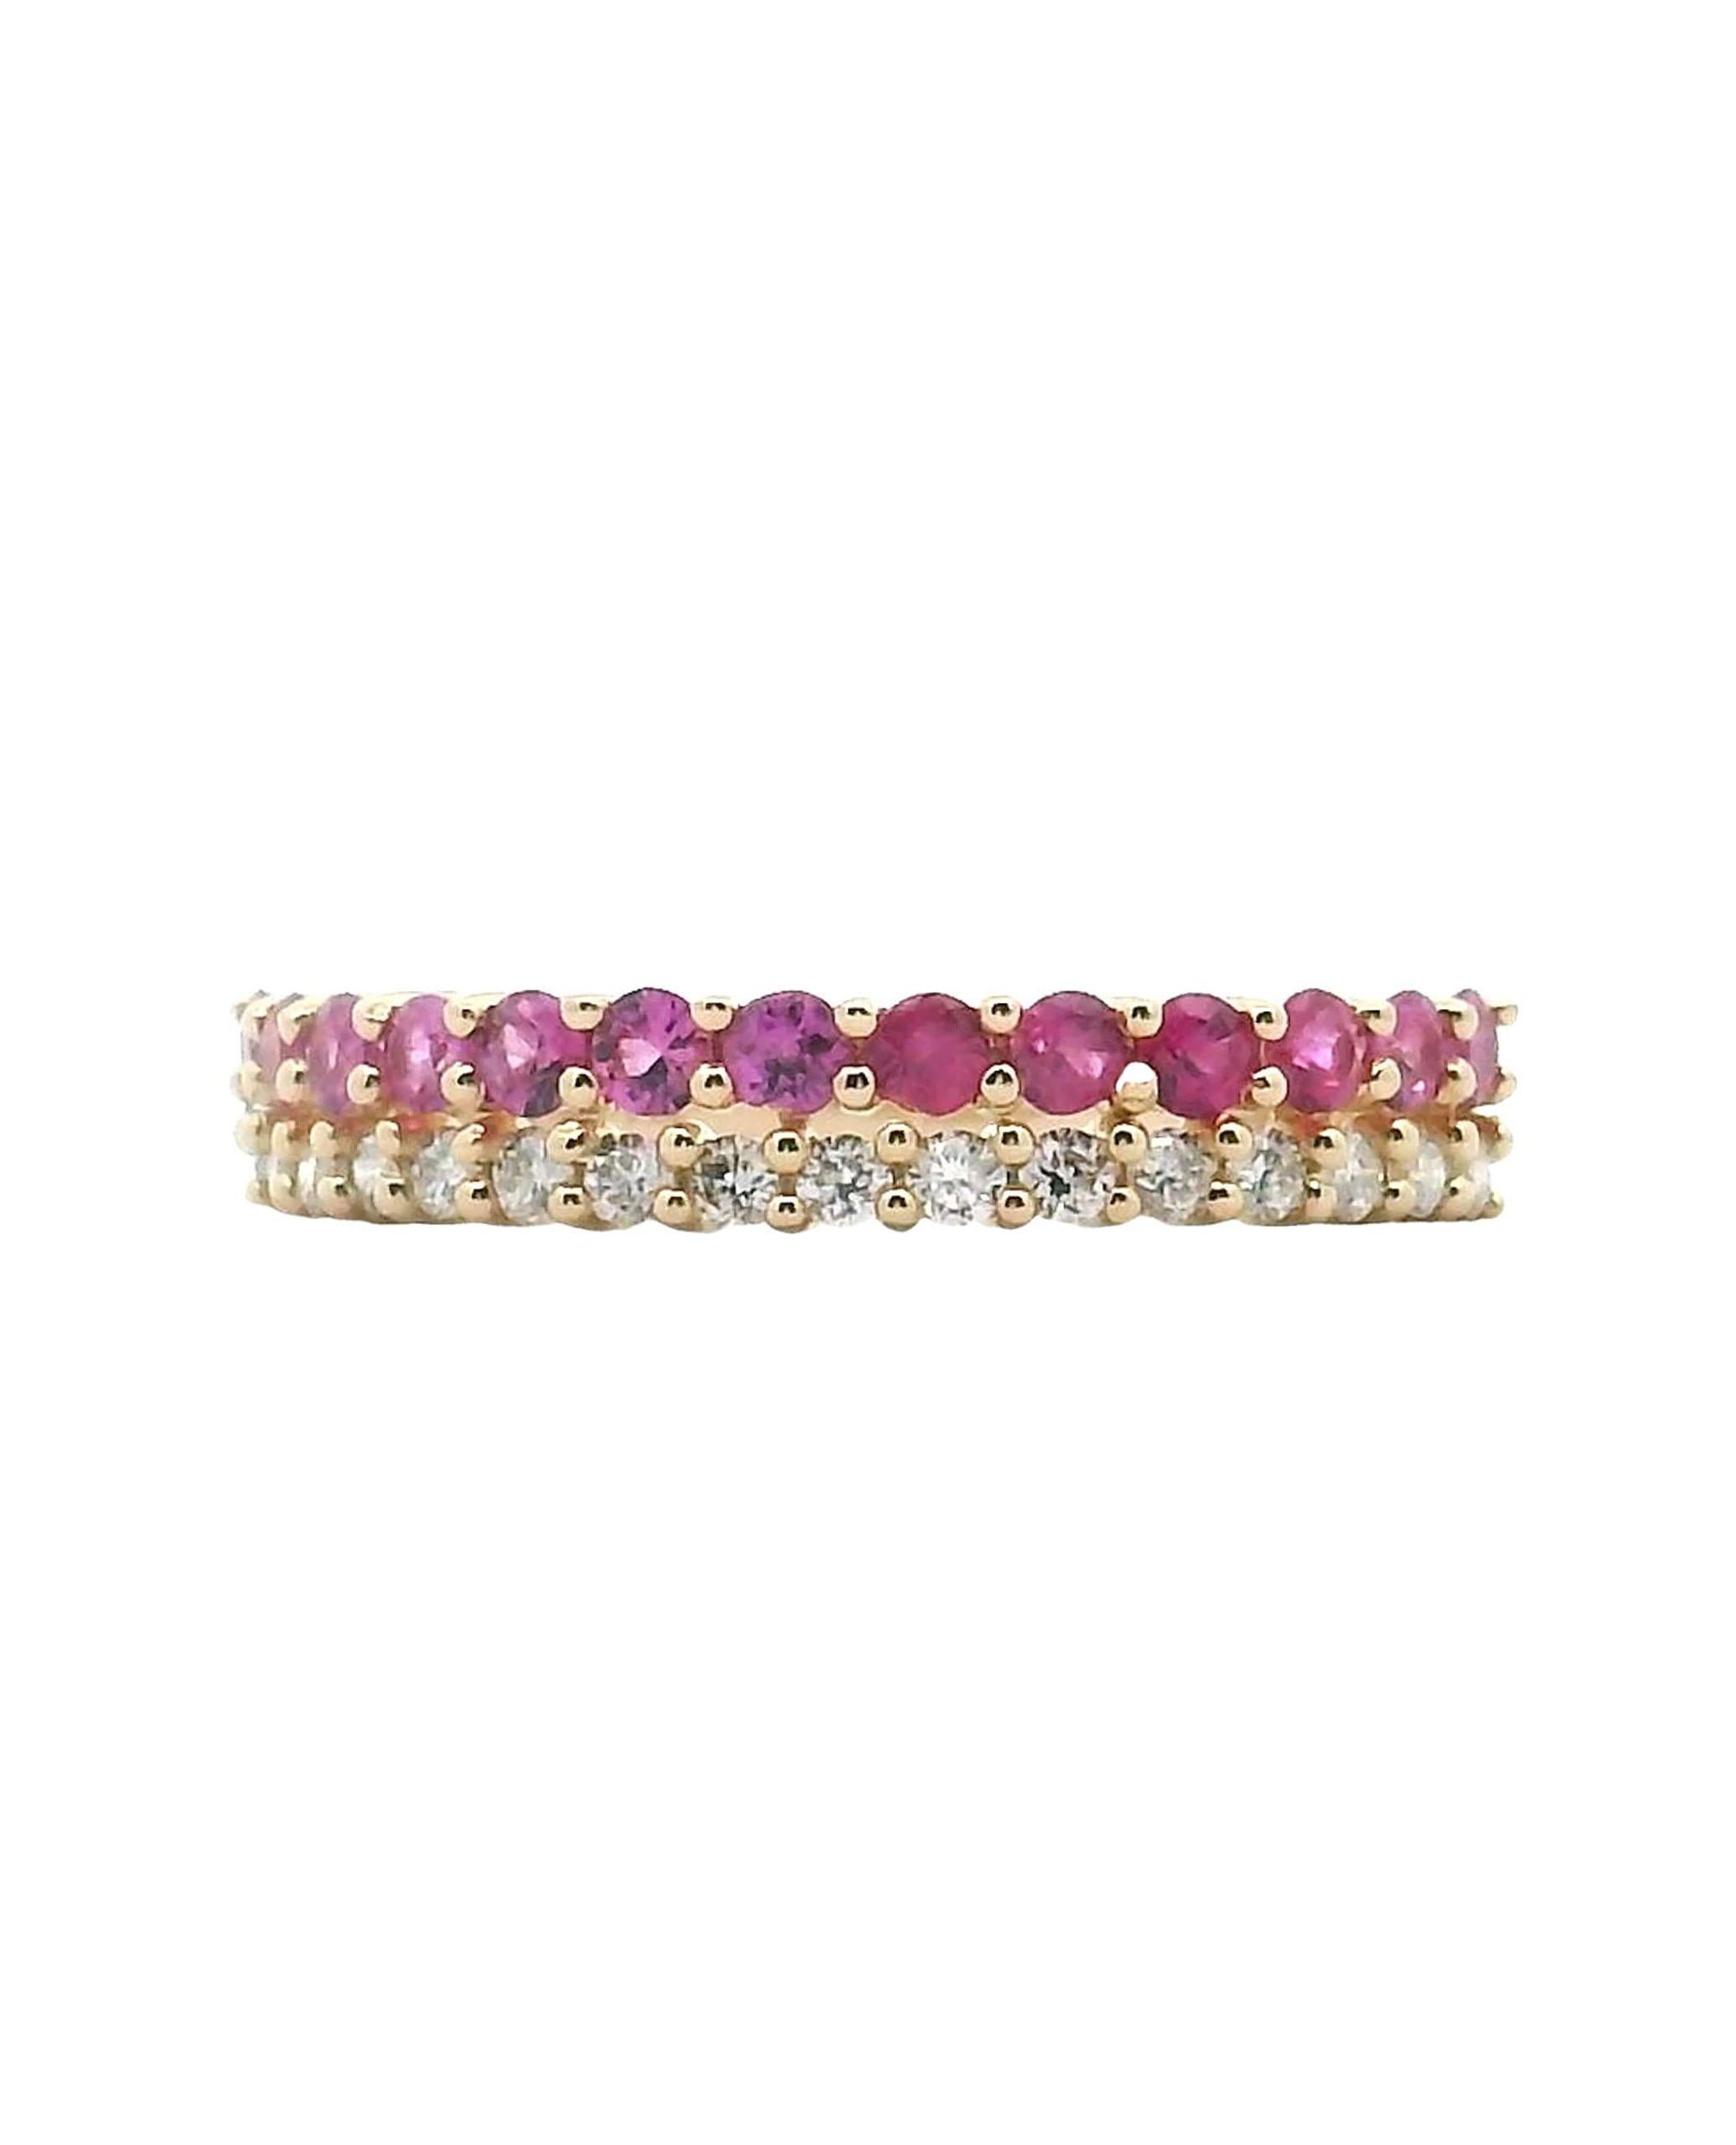 14K yellow gold ring with round faceted diamonds weighing 0.30 carats total and round faceted rubies weighing 0.54 carats total.

- Finger size: 6.5
- Diamonds are H/I color, SI clarity.